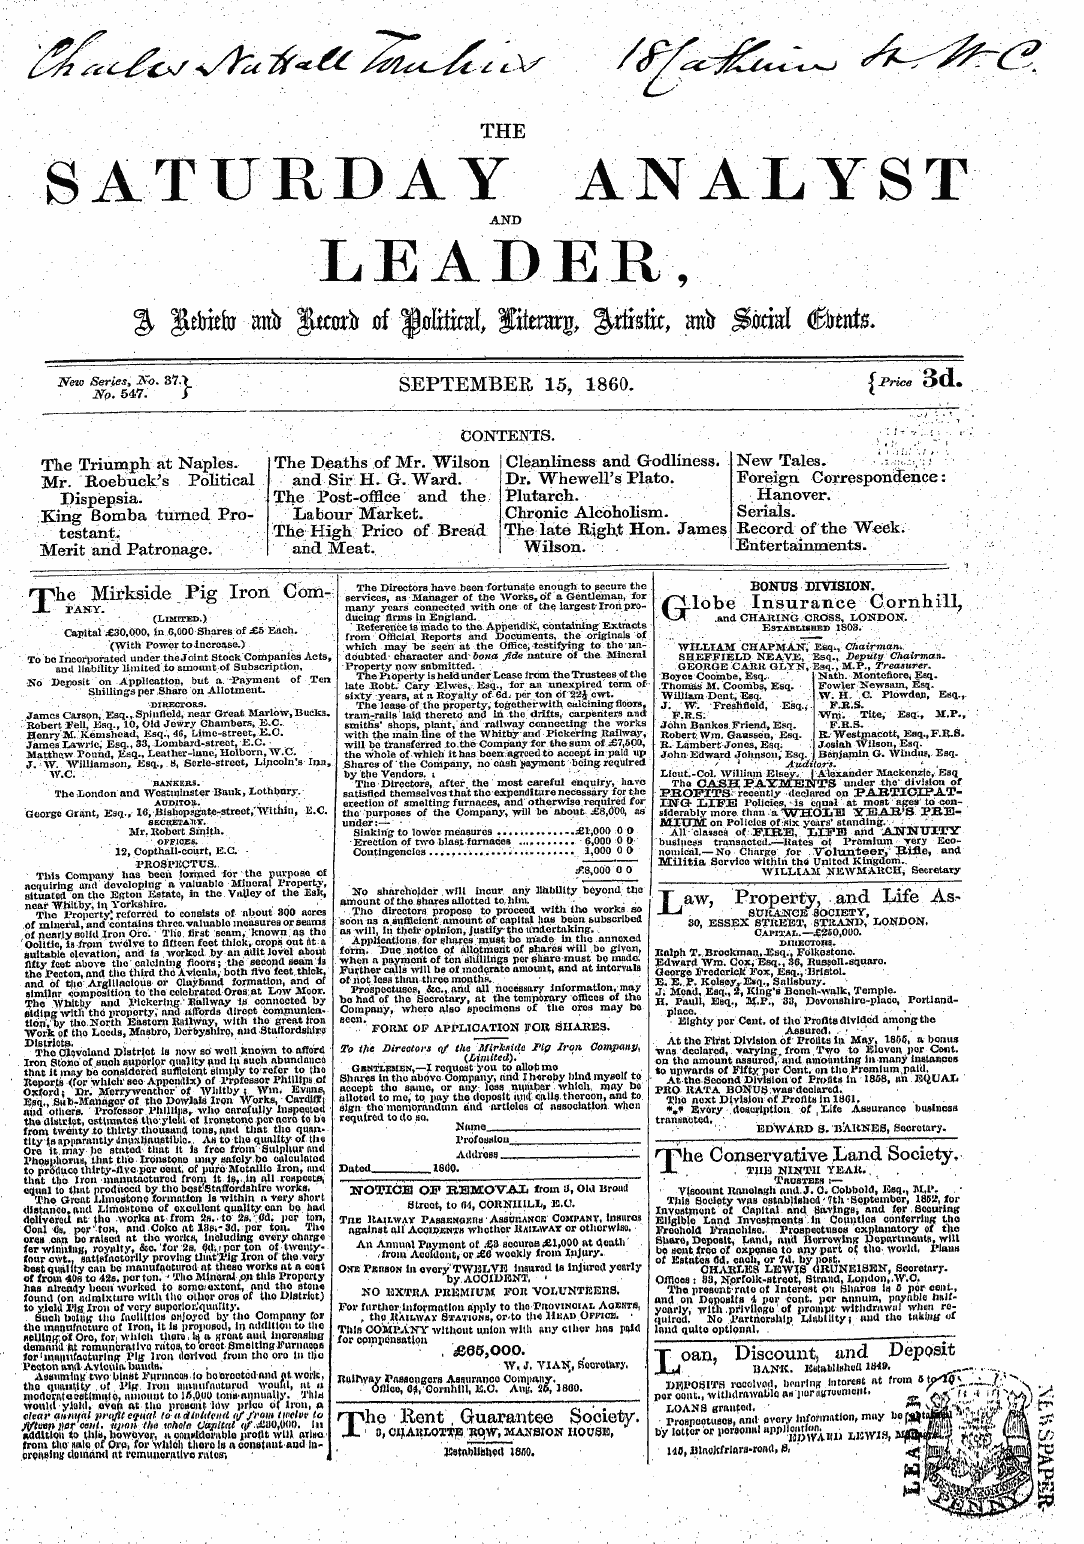 Leader (1850-1860): jS F Y, 2nd edition - Ad00113